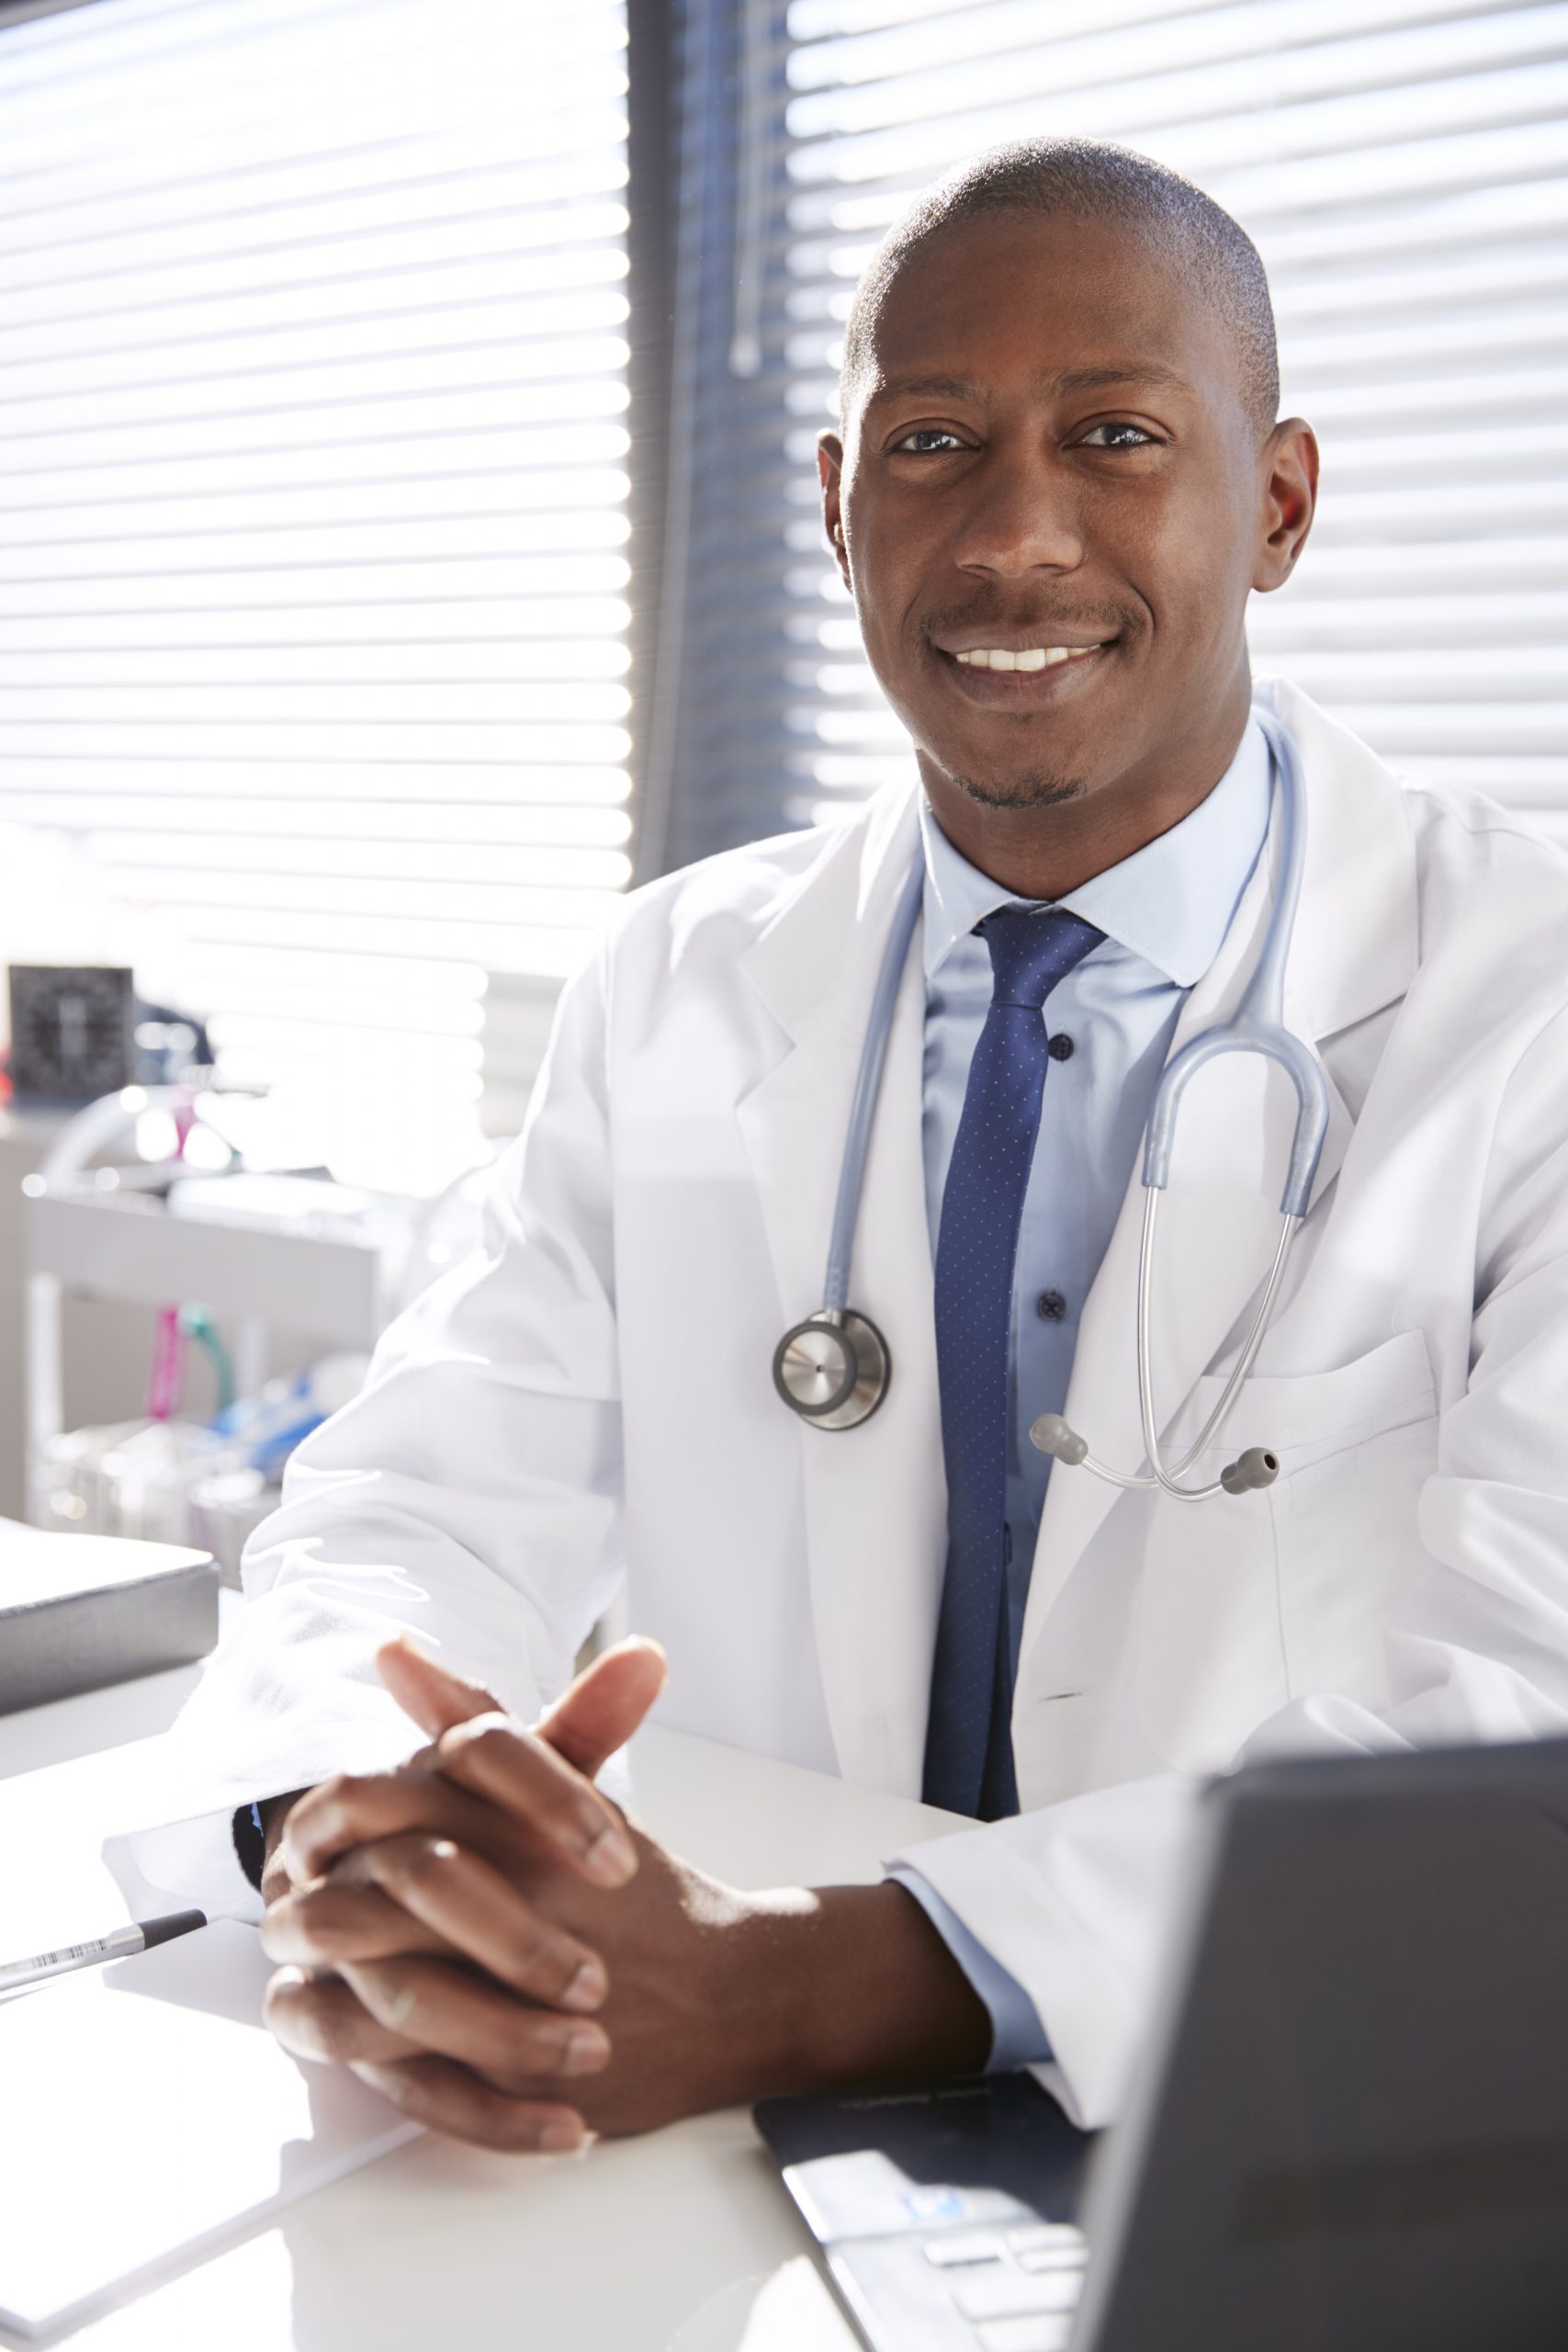 Portrait Of Smiling Male Doctor Wearing White Coat With Stethoscope Sitting Behind Desk In Office